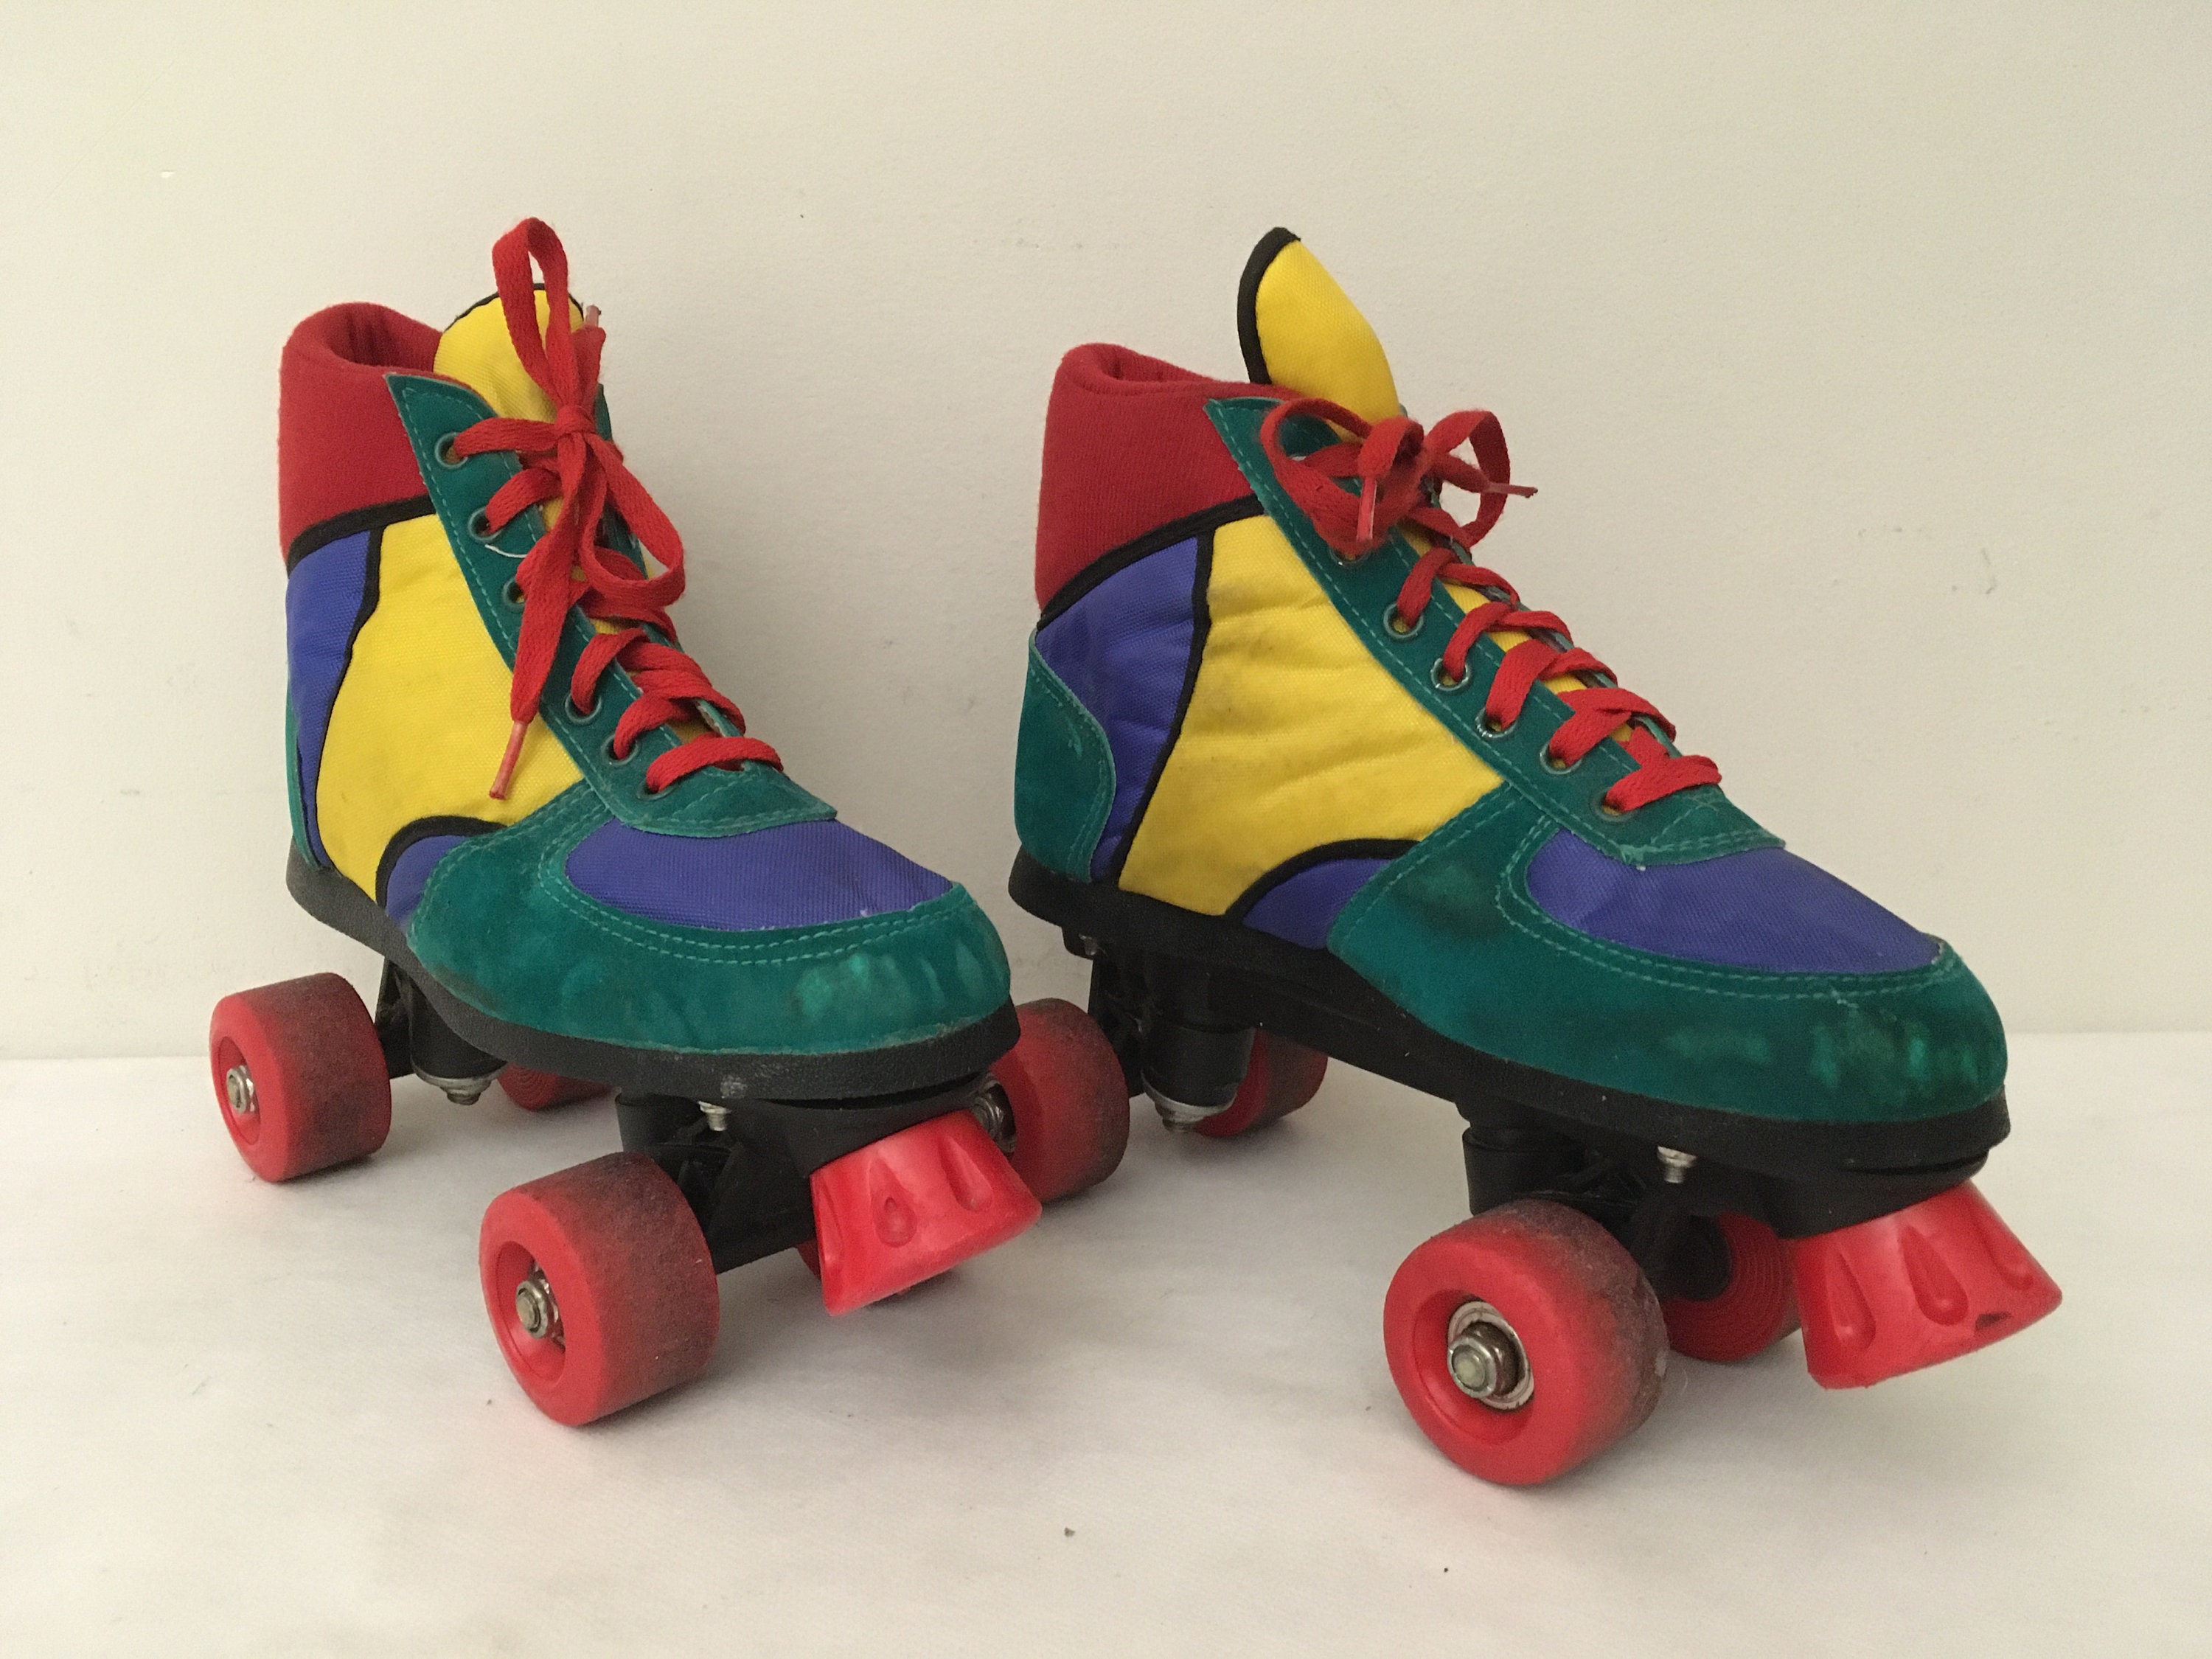 Vintage 70s Retro Roller Skates Green Red Blue and Yellow. - Etsy